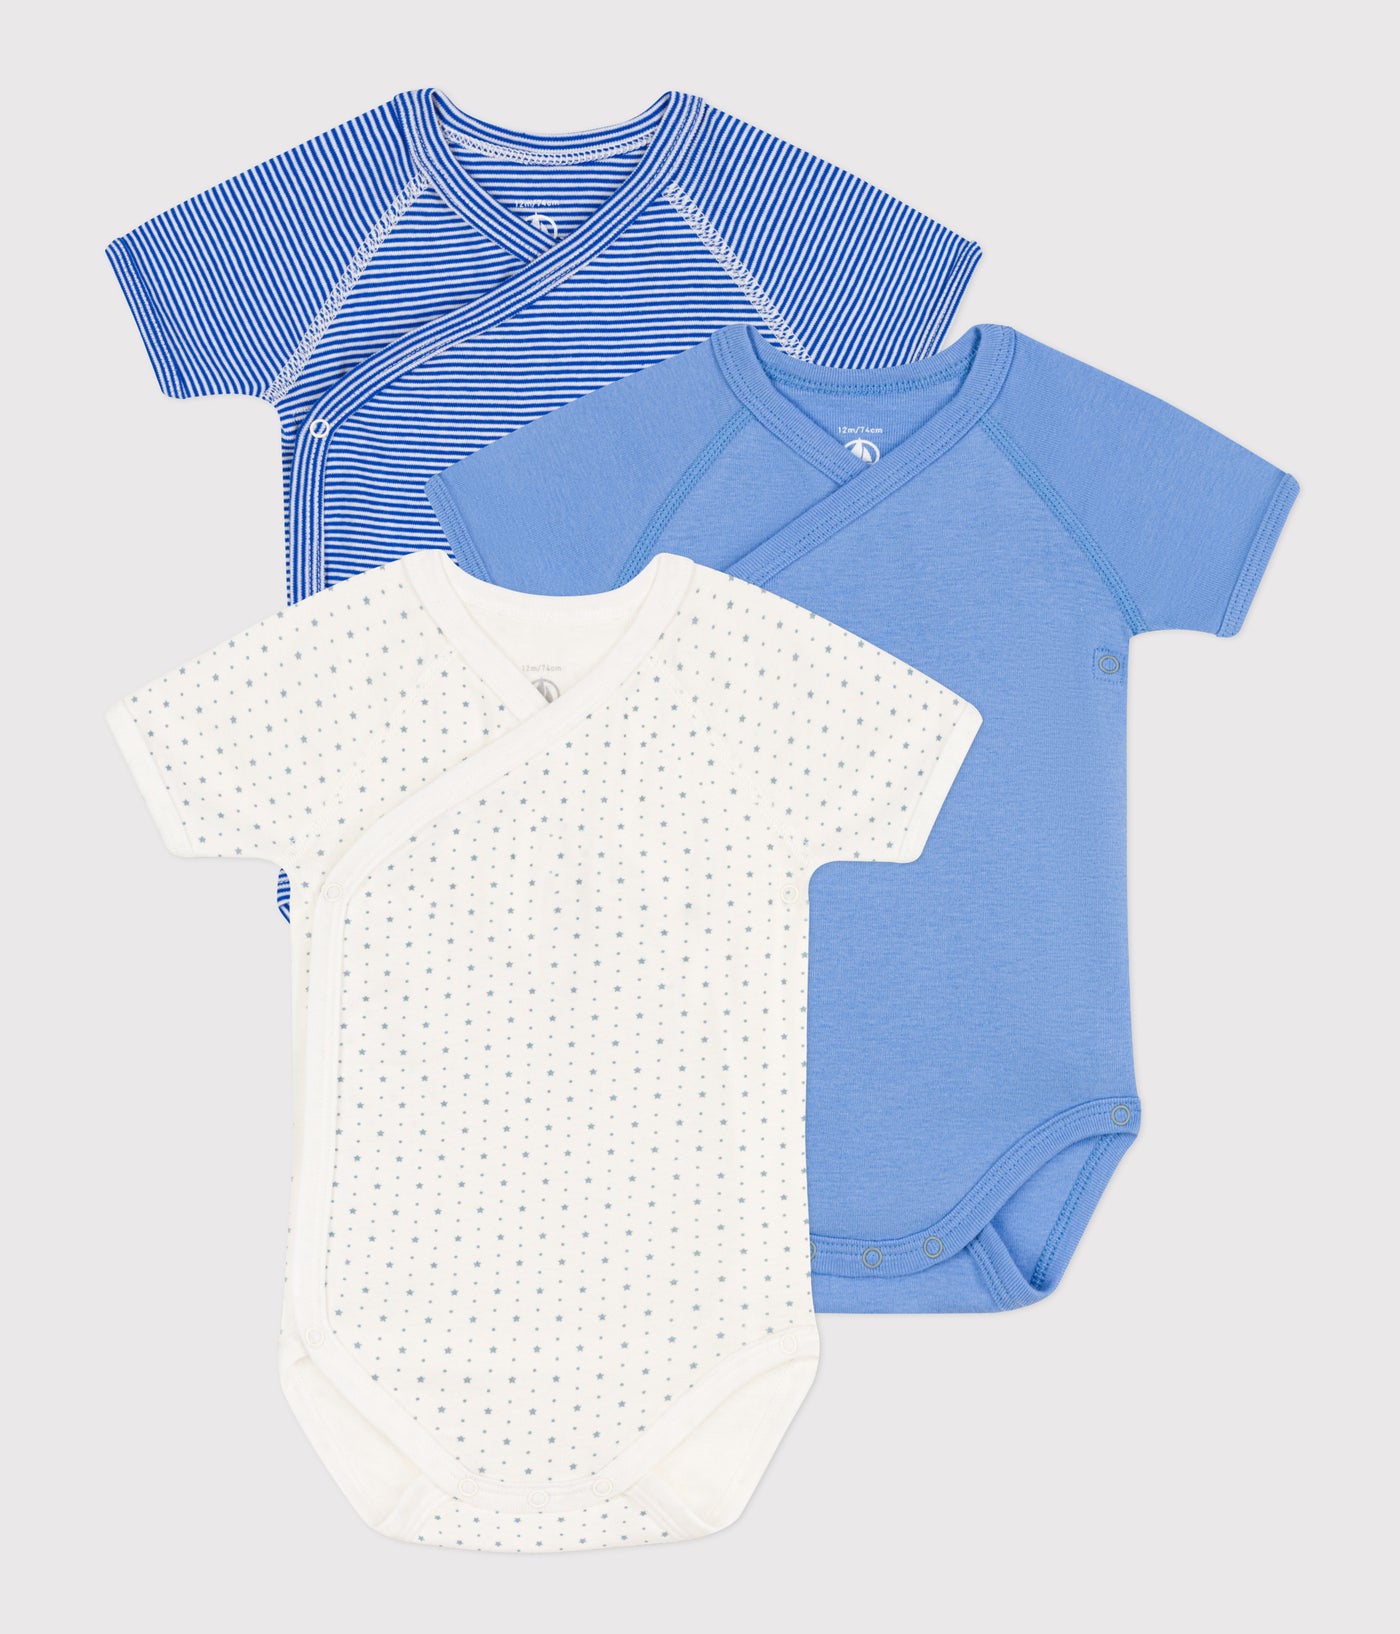 WRAPOVER SHORT-SLEEVED PATTERNED COTTON BODYSUITS - 3-PACK